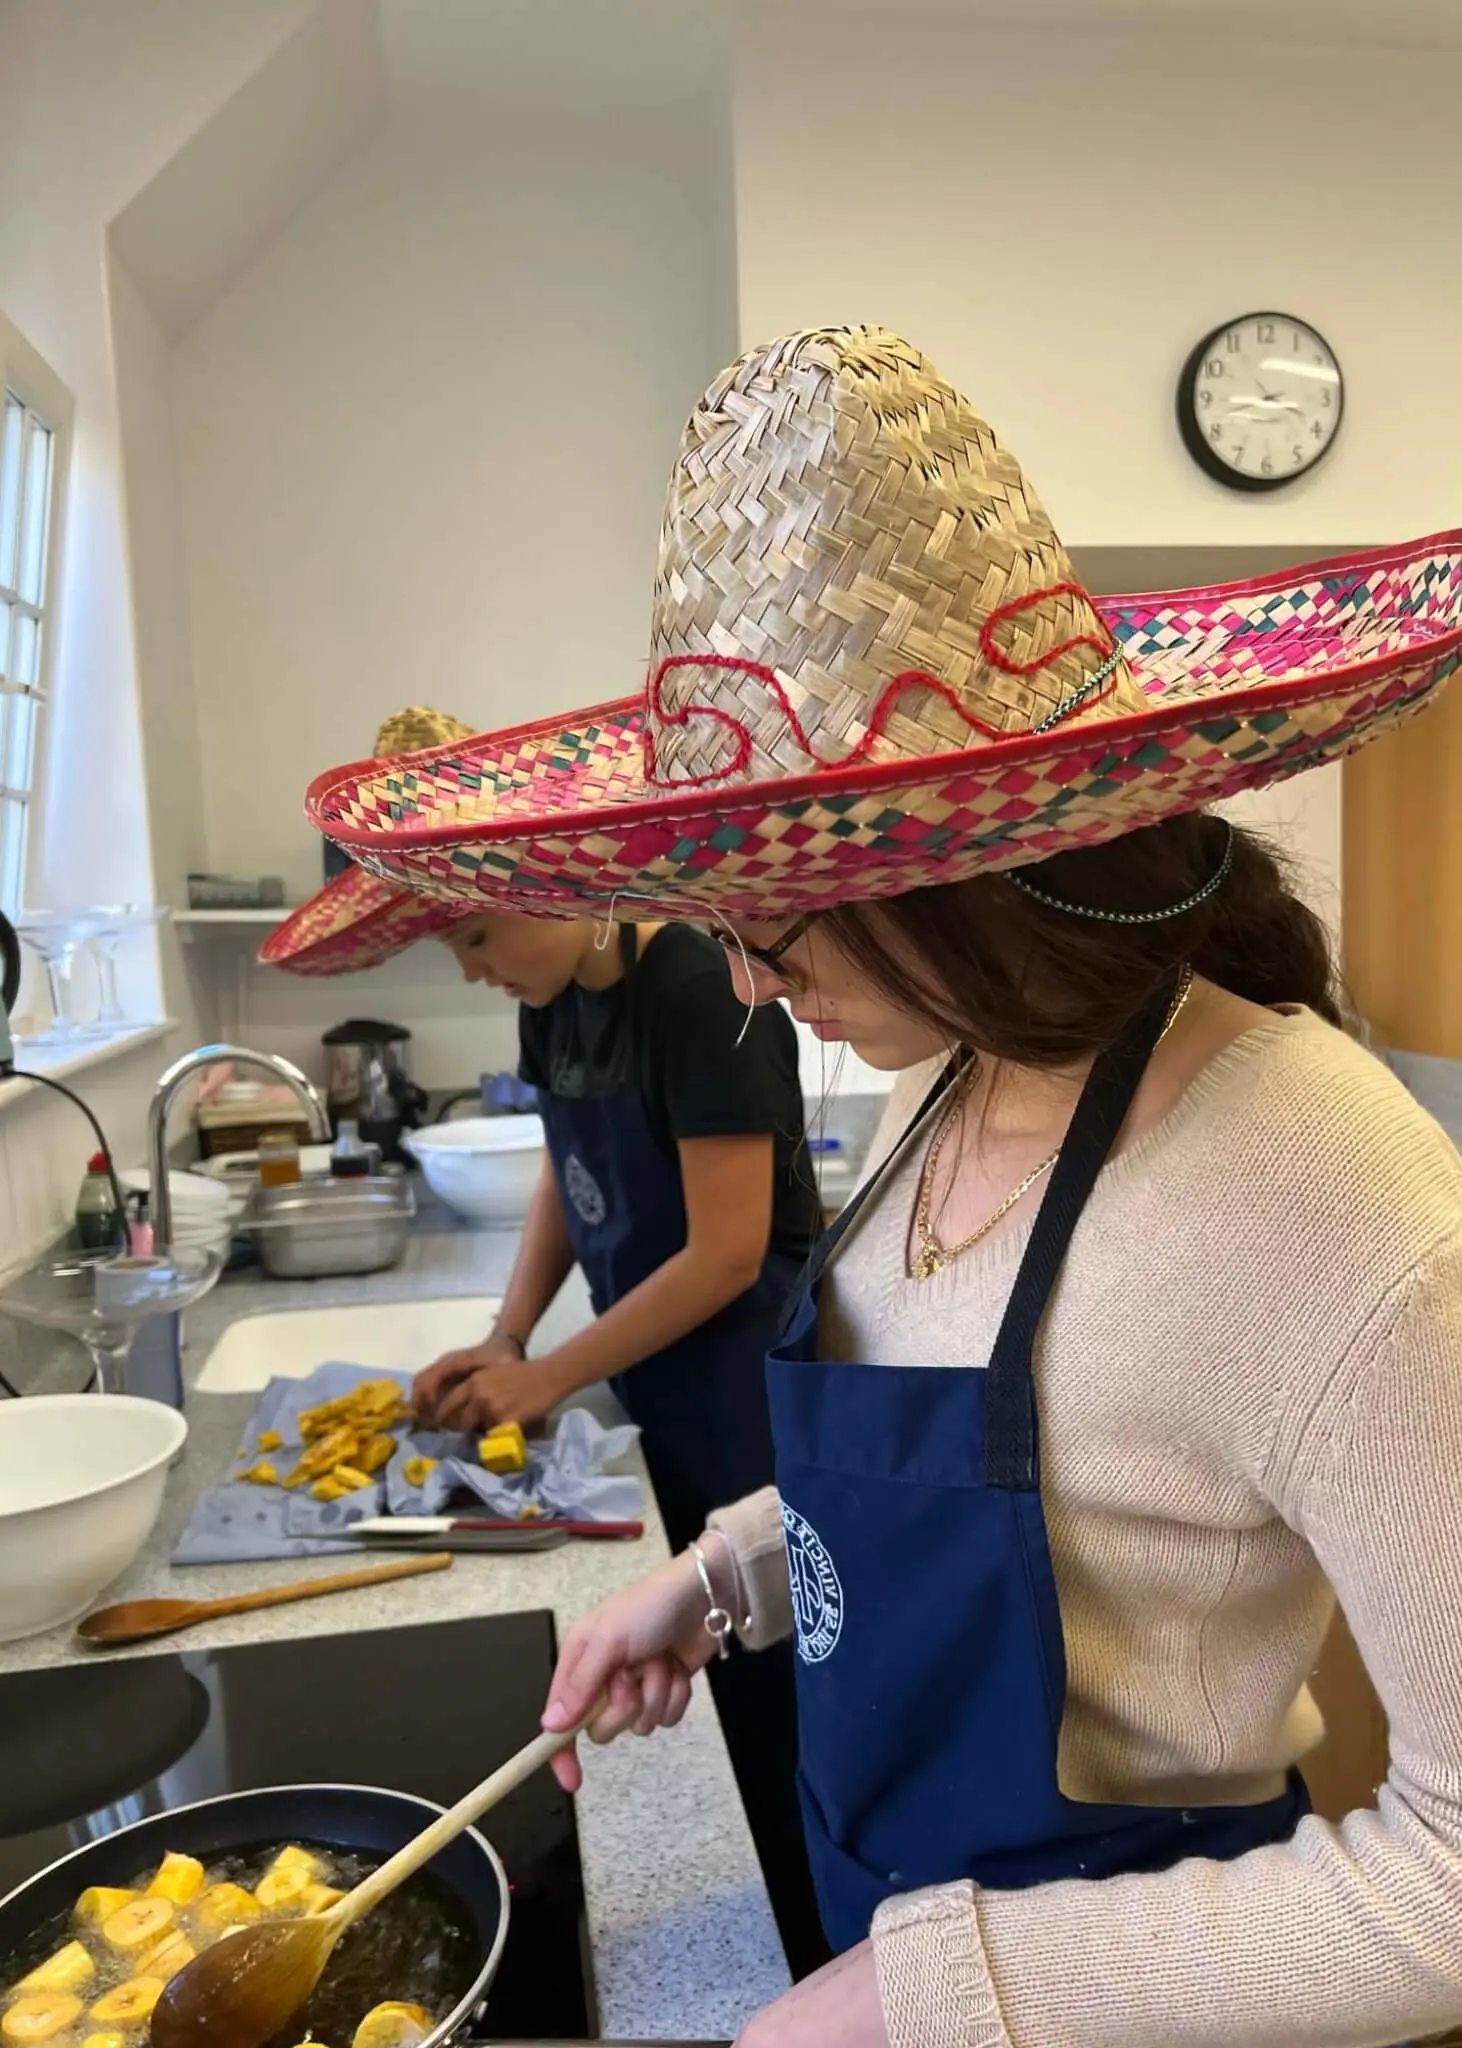 At Ibstock Place School, Roehampton, Lower Sixth Form Spanish classes joined together to cook up a feast of Hispanic specialities.